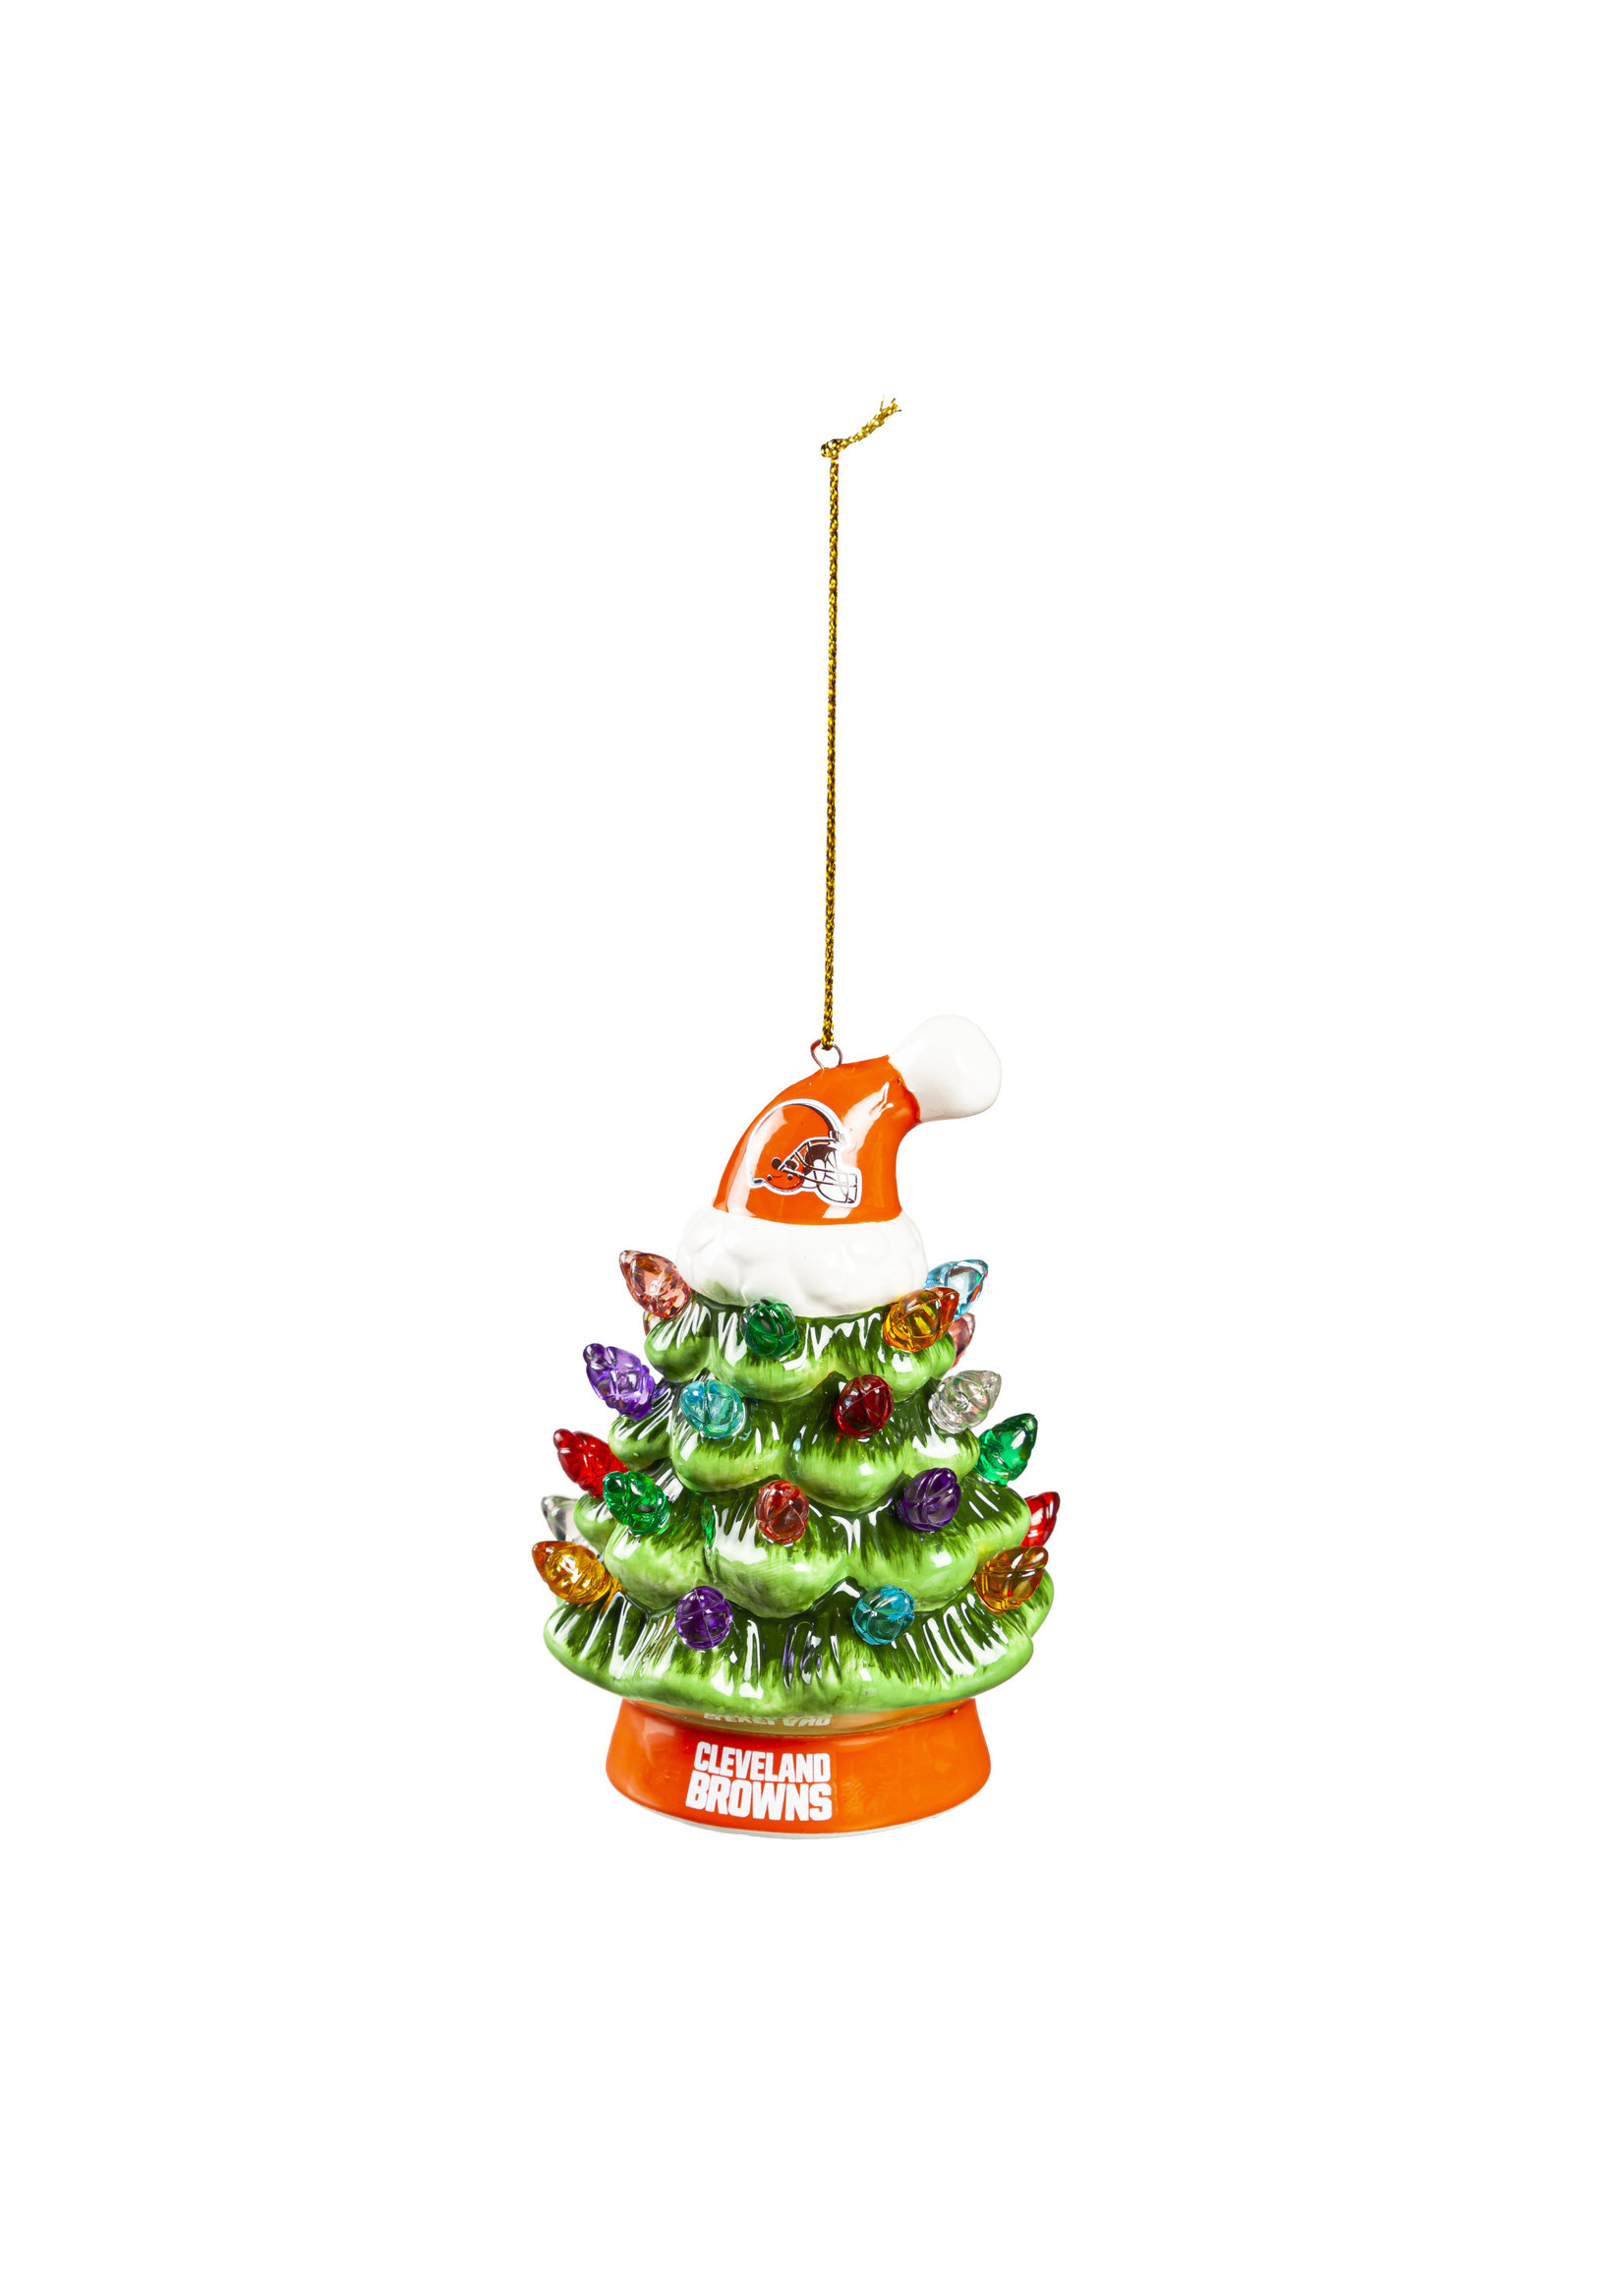 CLEVELAND BROWNS 4" LED TREE ORNAMENT